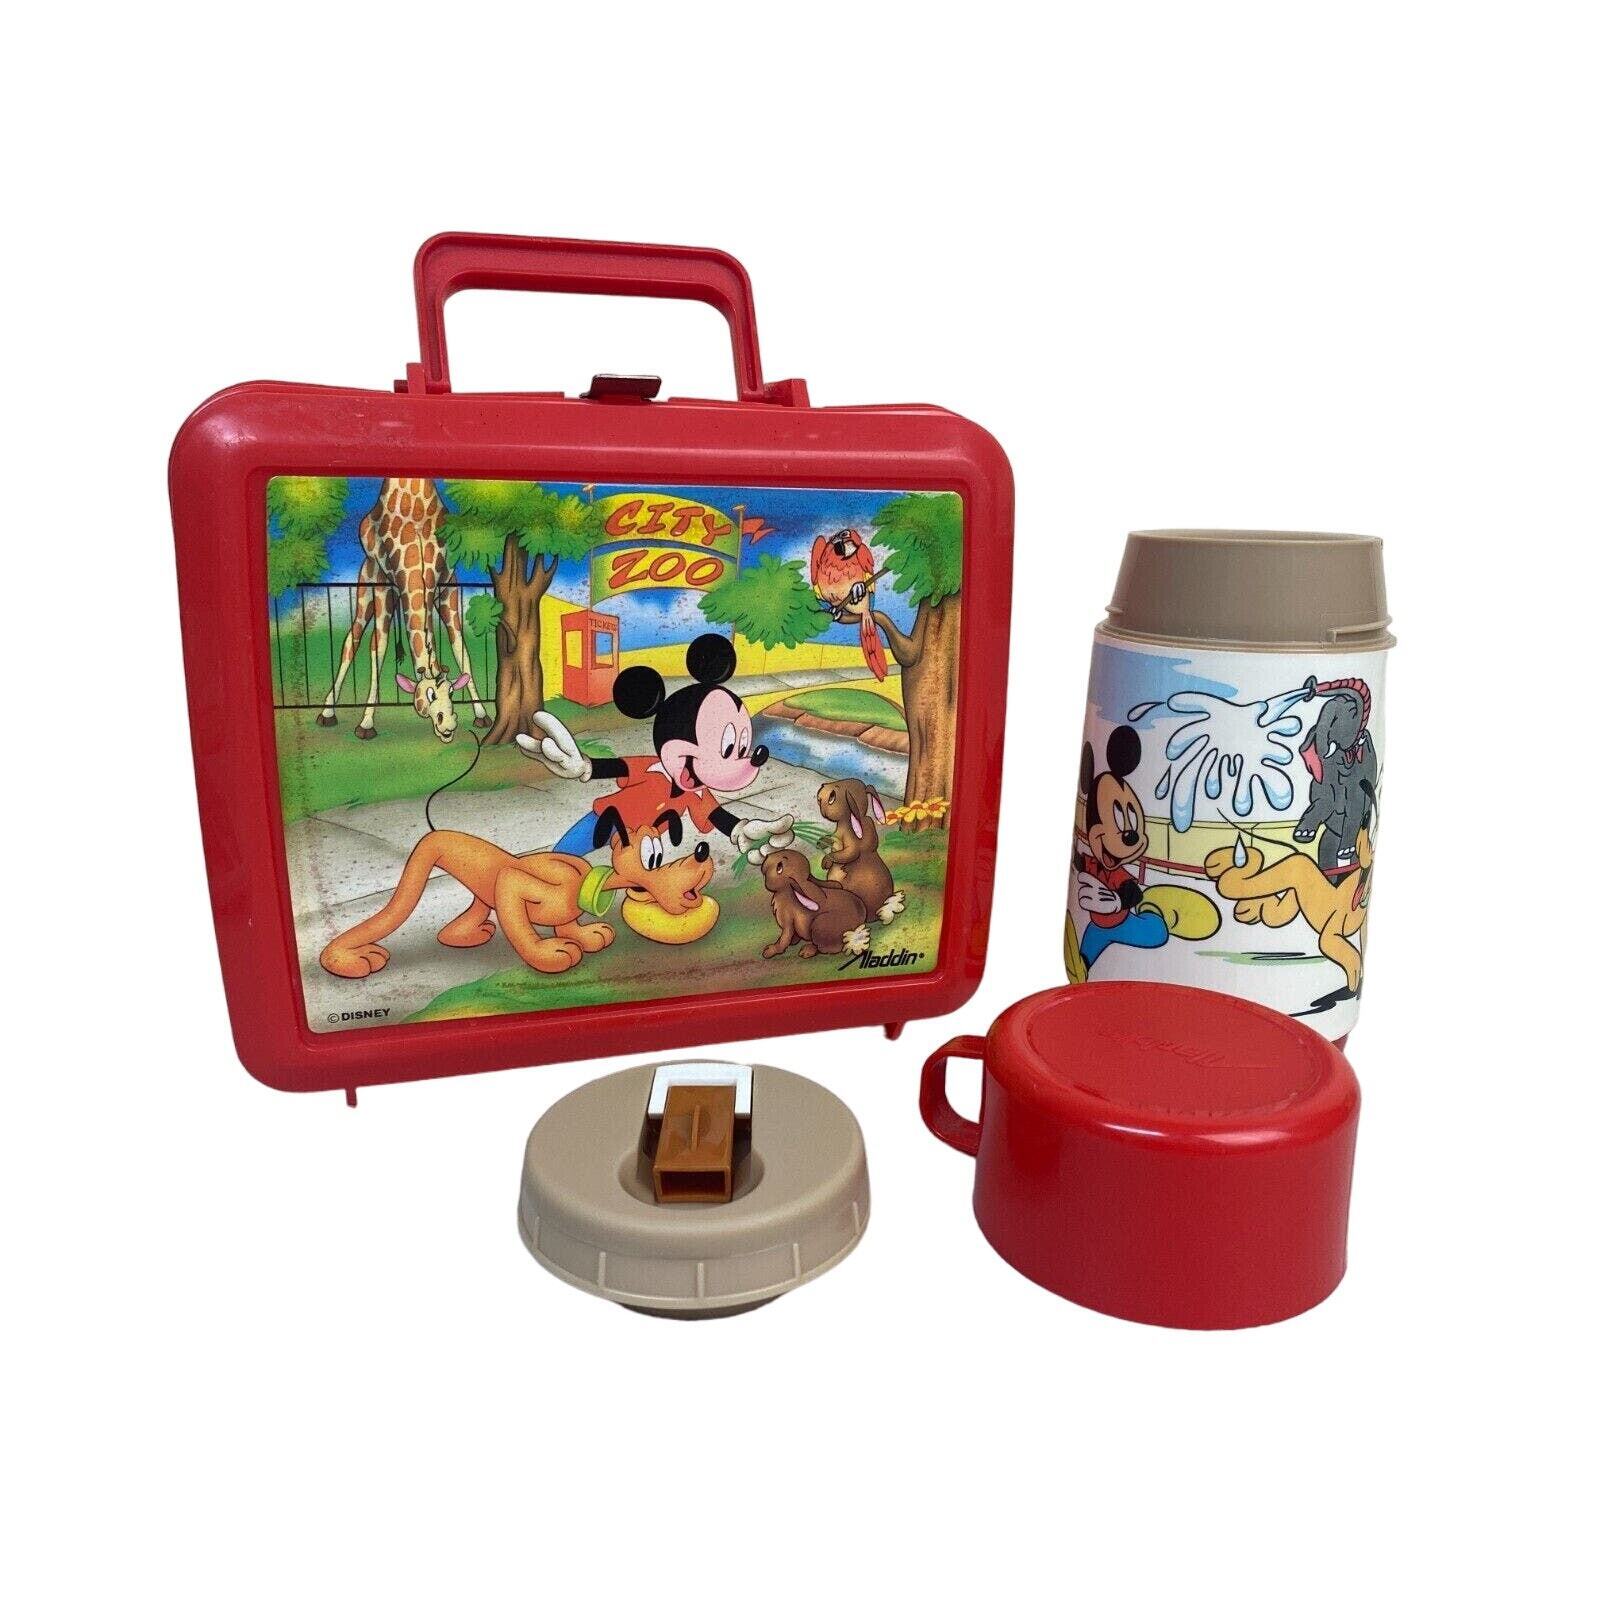 Vintage Mickey Mouse Disney City Zoo Thermos & Lunch Box Complete. Aladdin